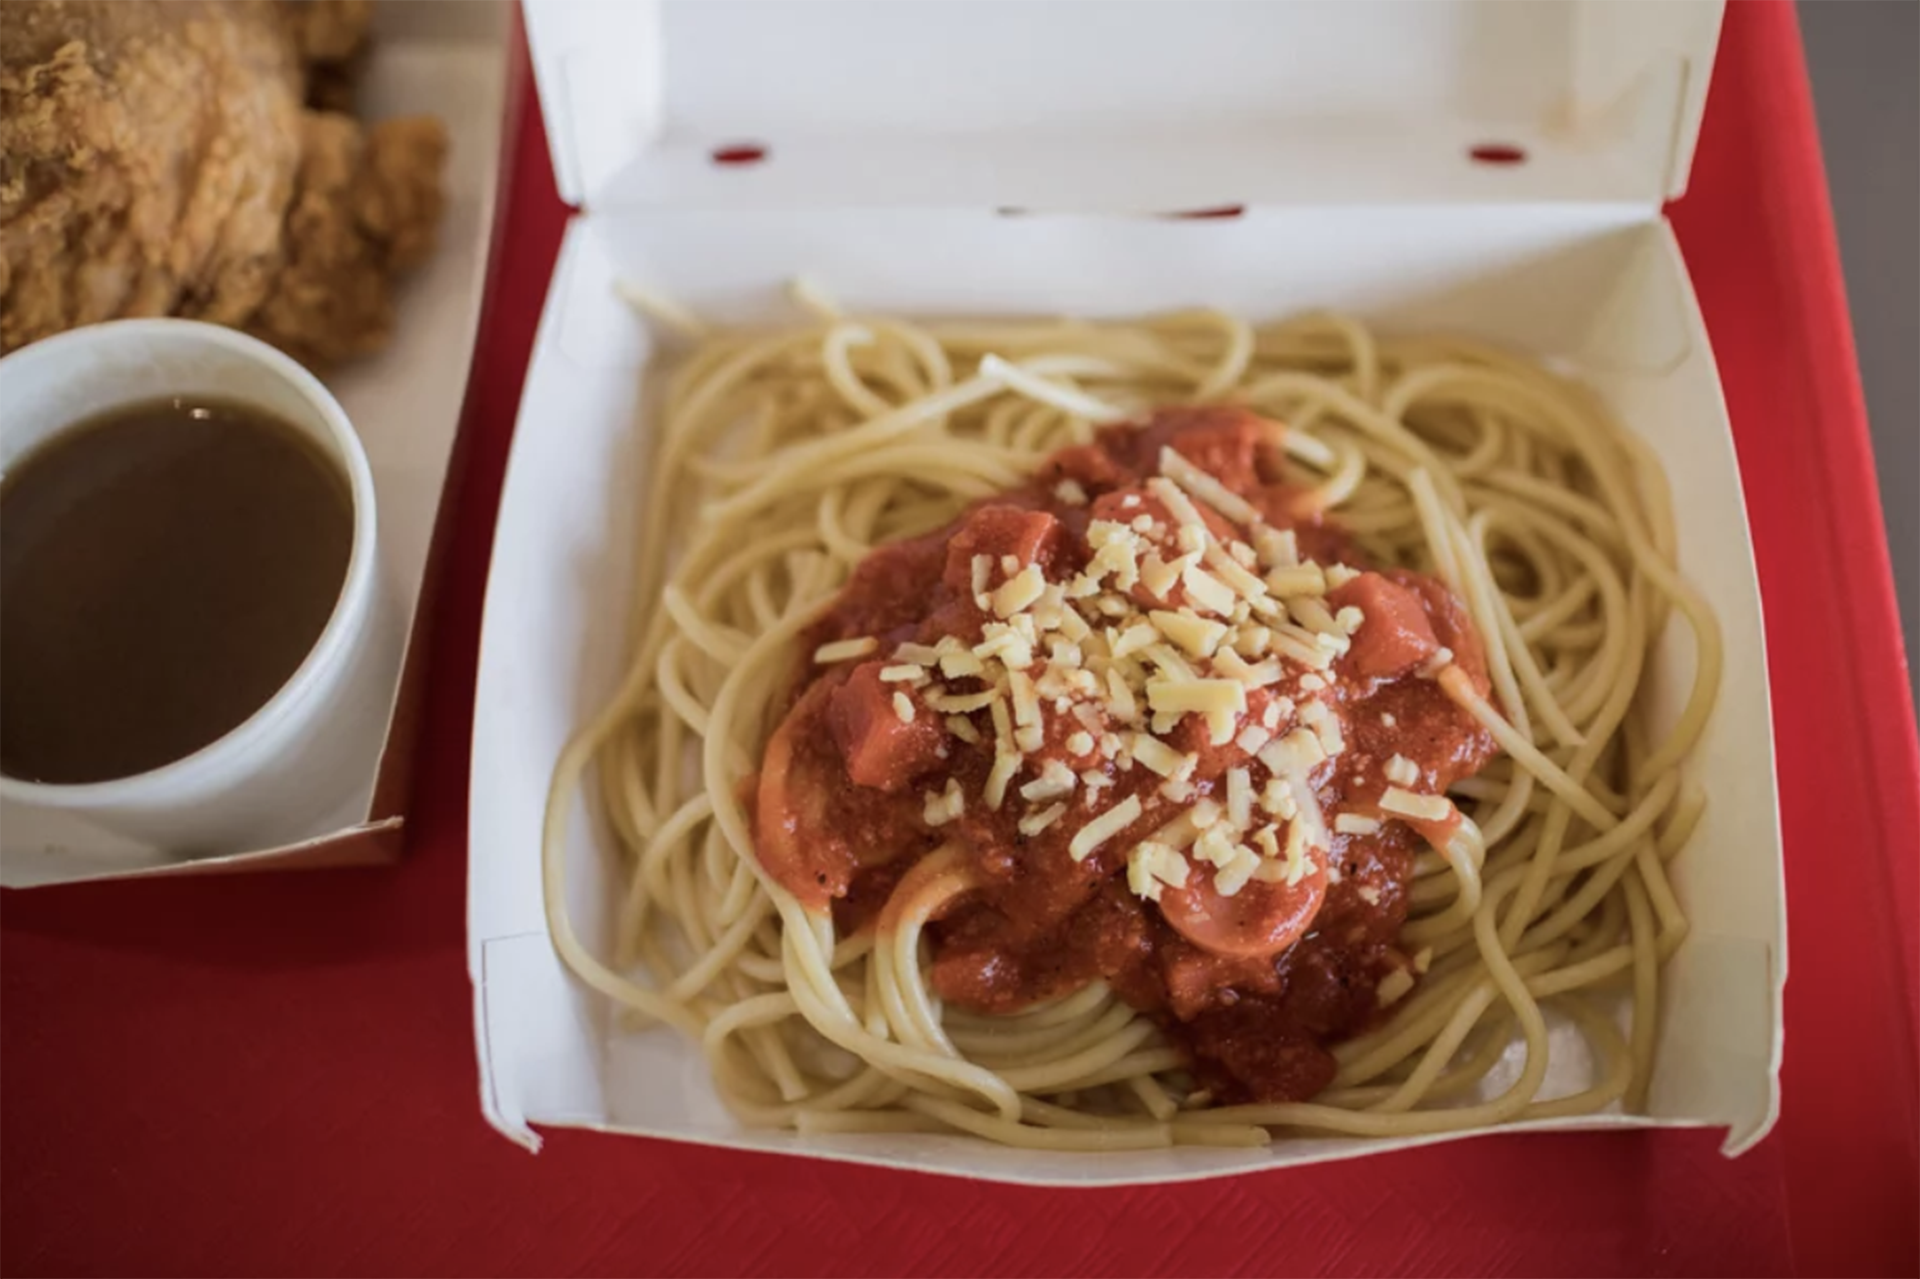 Filipino spaghetti, often sweeter than American spaghetti, is made with slices of hot dogs and served with a side of Chickenjoy at Jollibee.